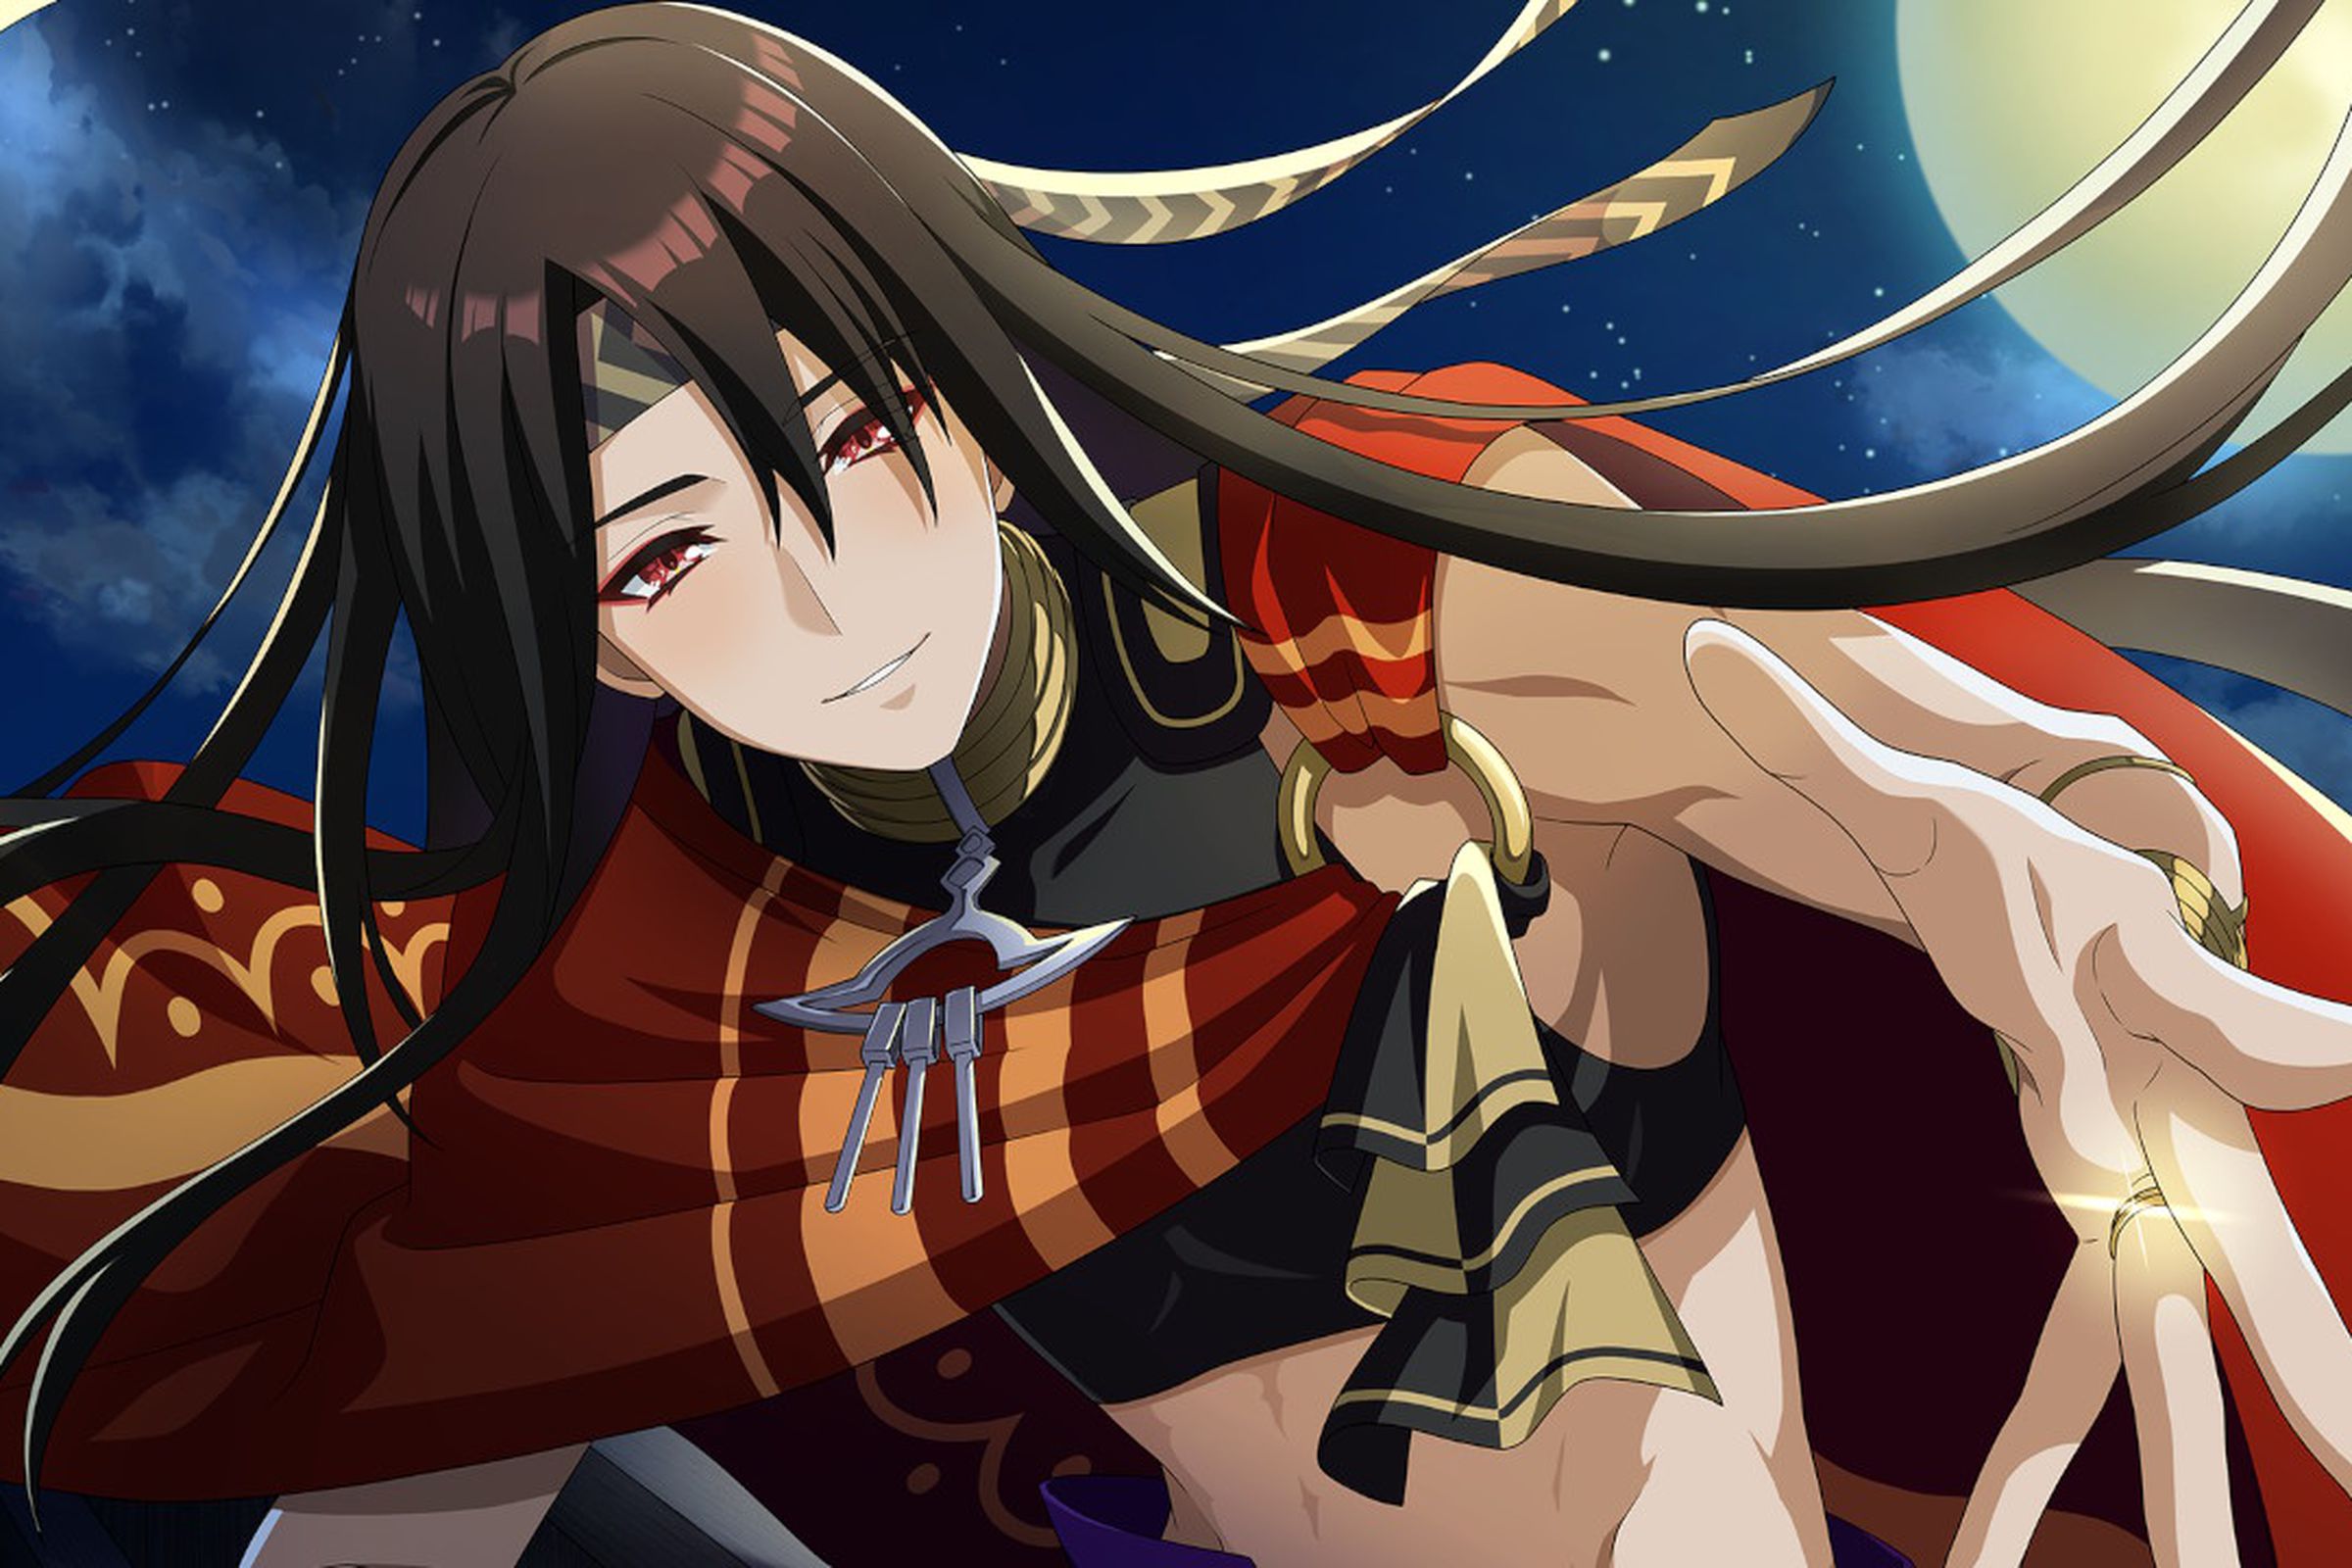 Screenshot from Fire Emblem Engage featuring a man with long black hair and flowy garments reaching out to the camera